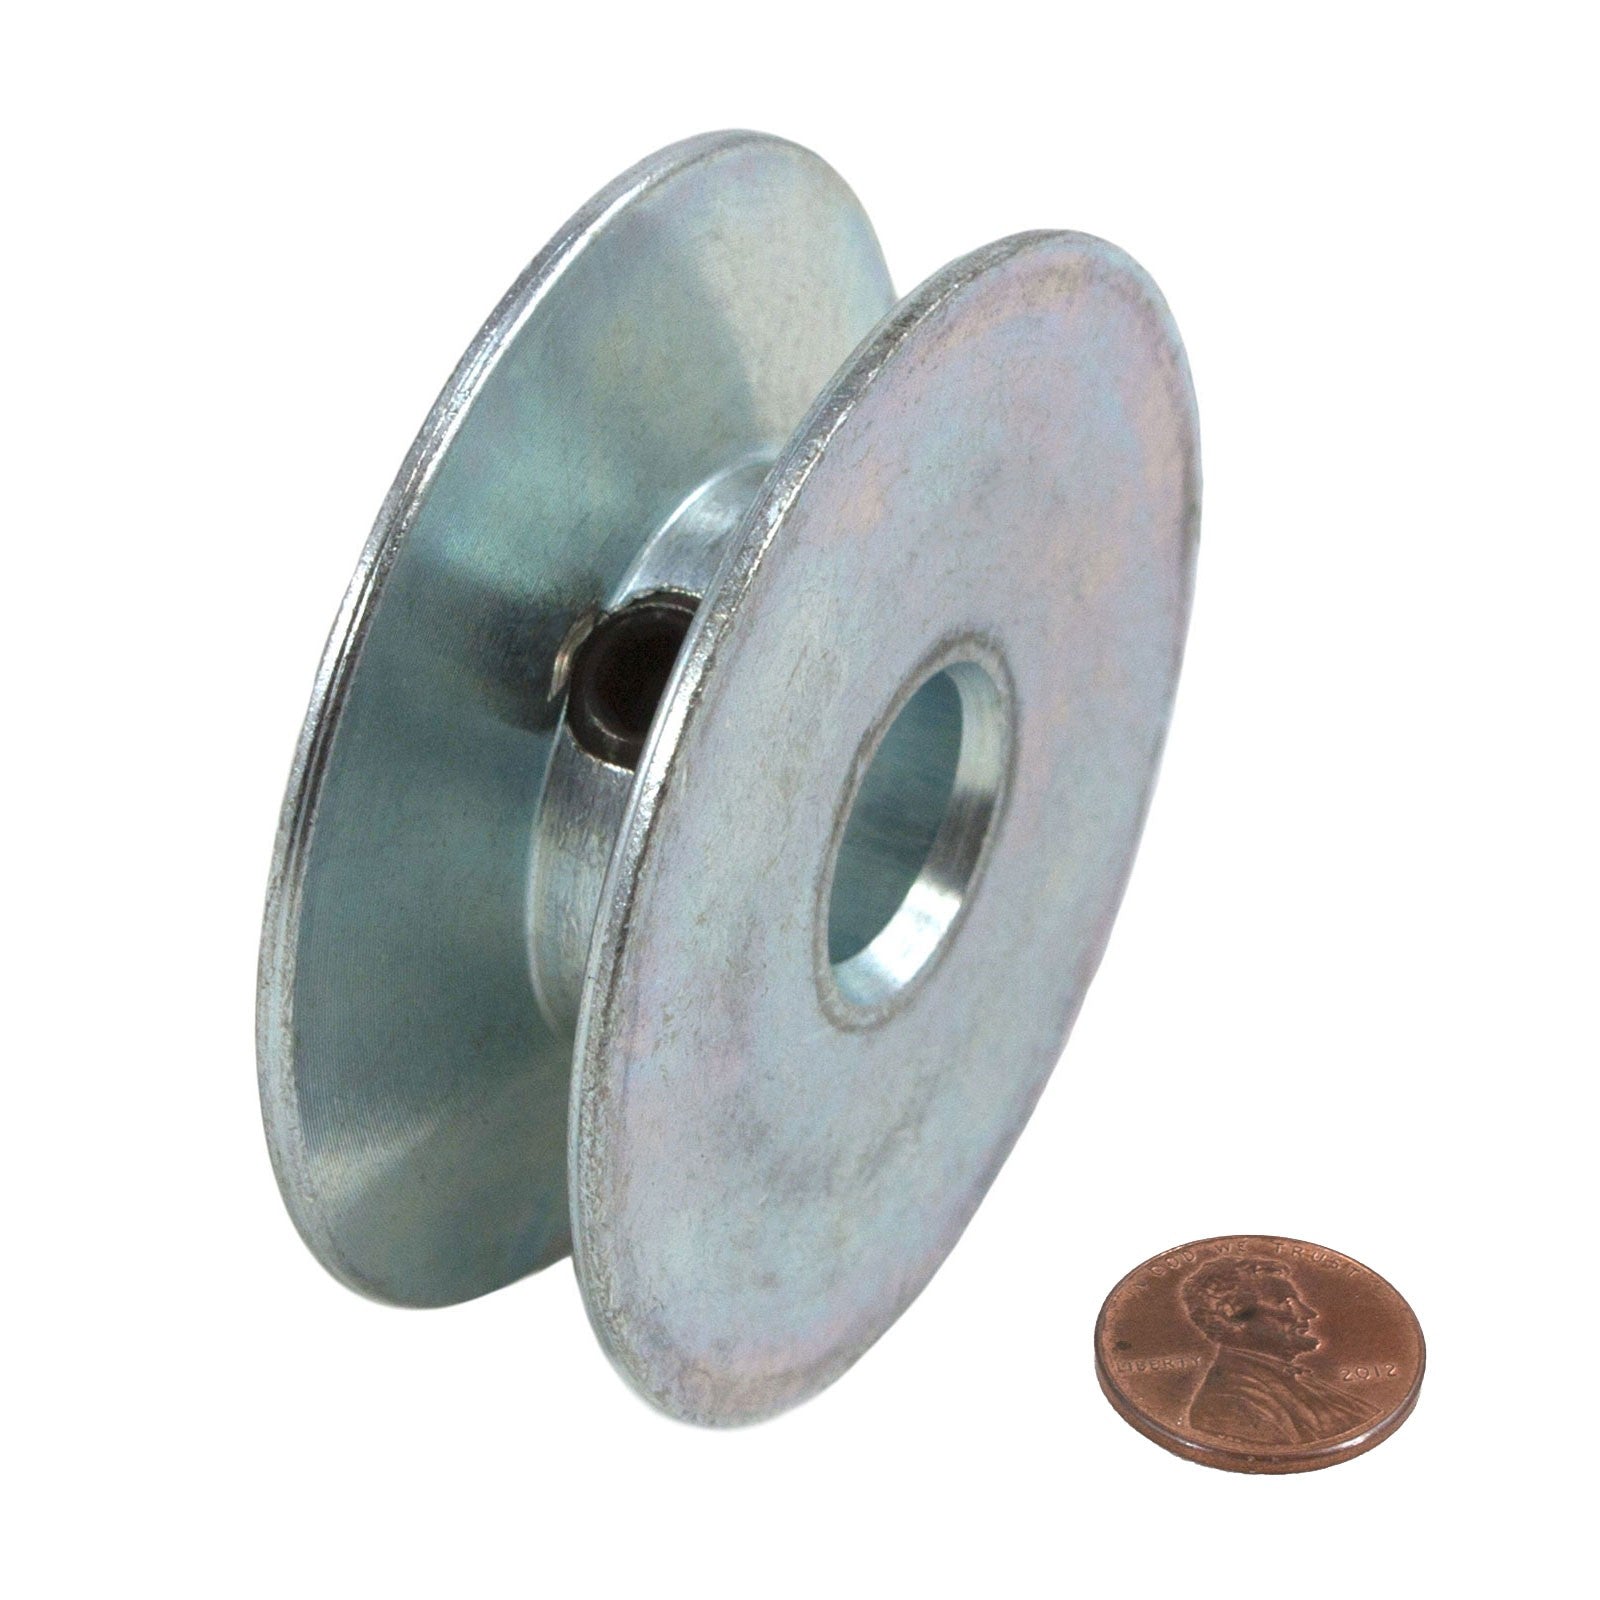 Linear 2200-132 Pulley 2", 5/8" Bore